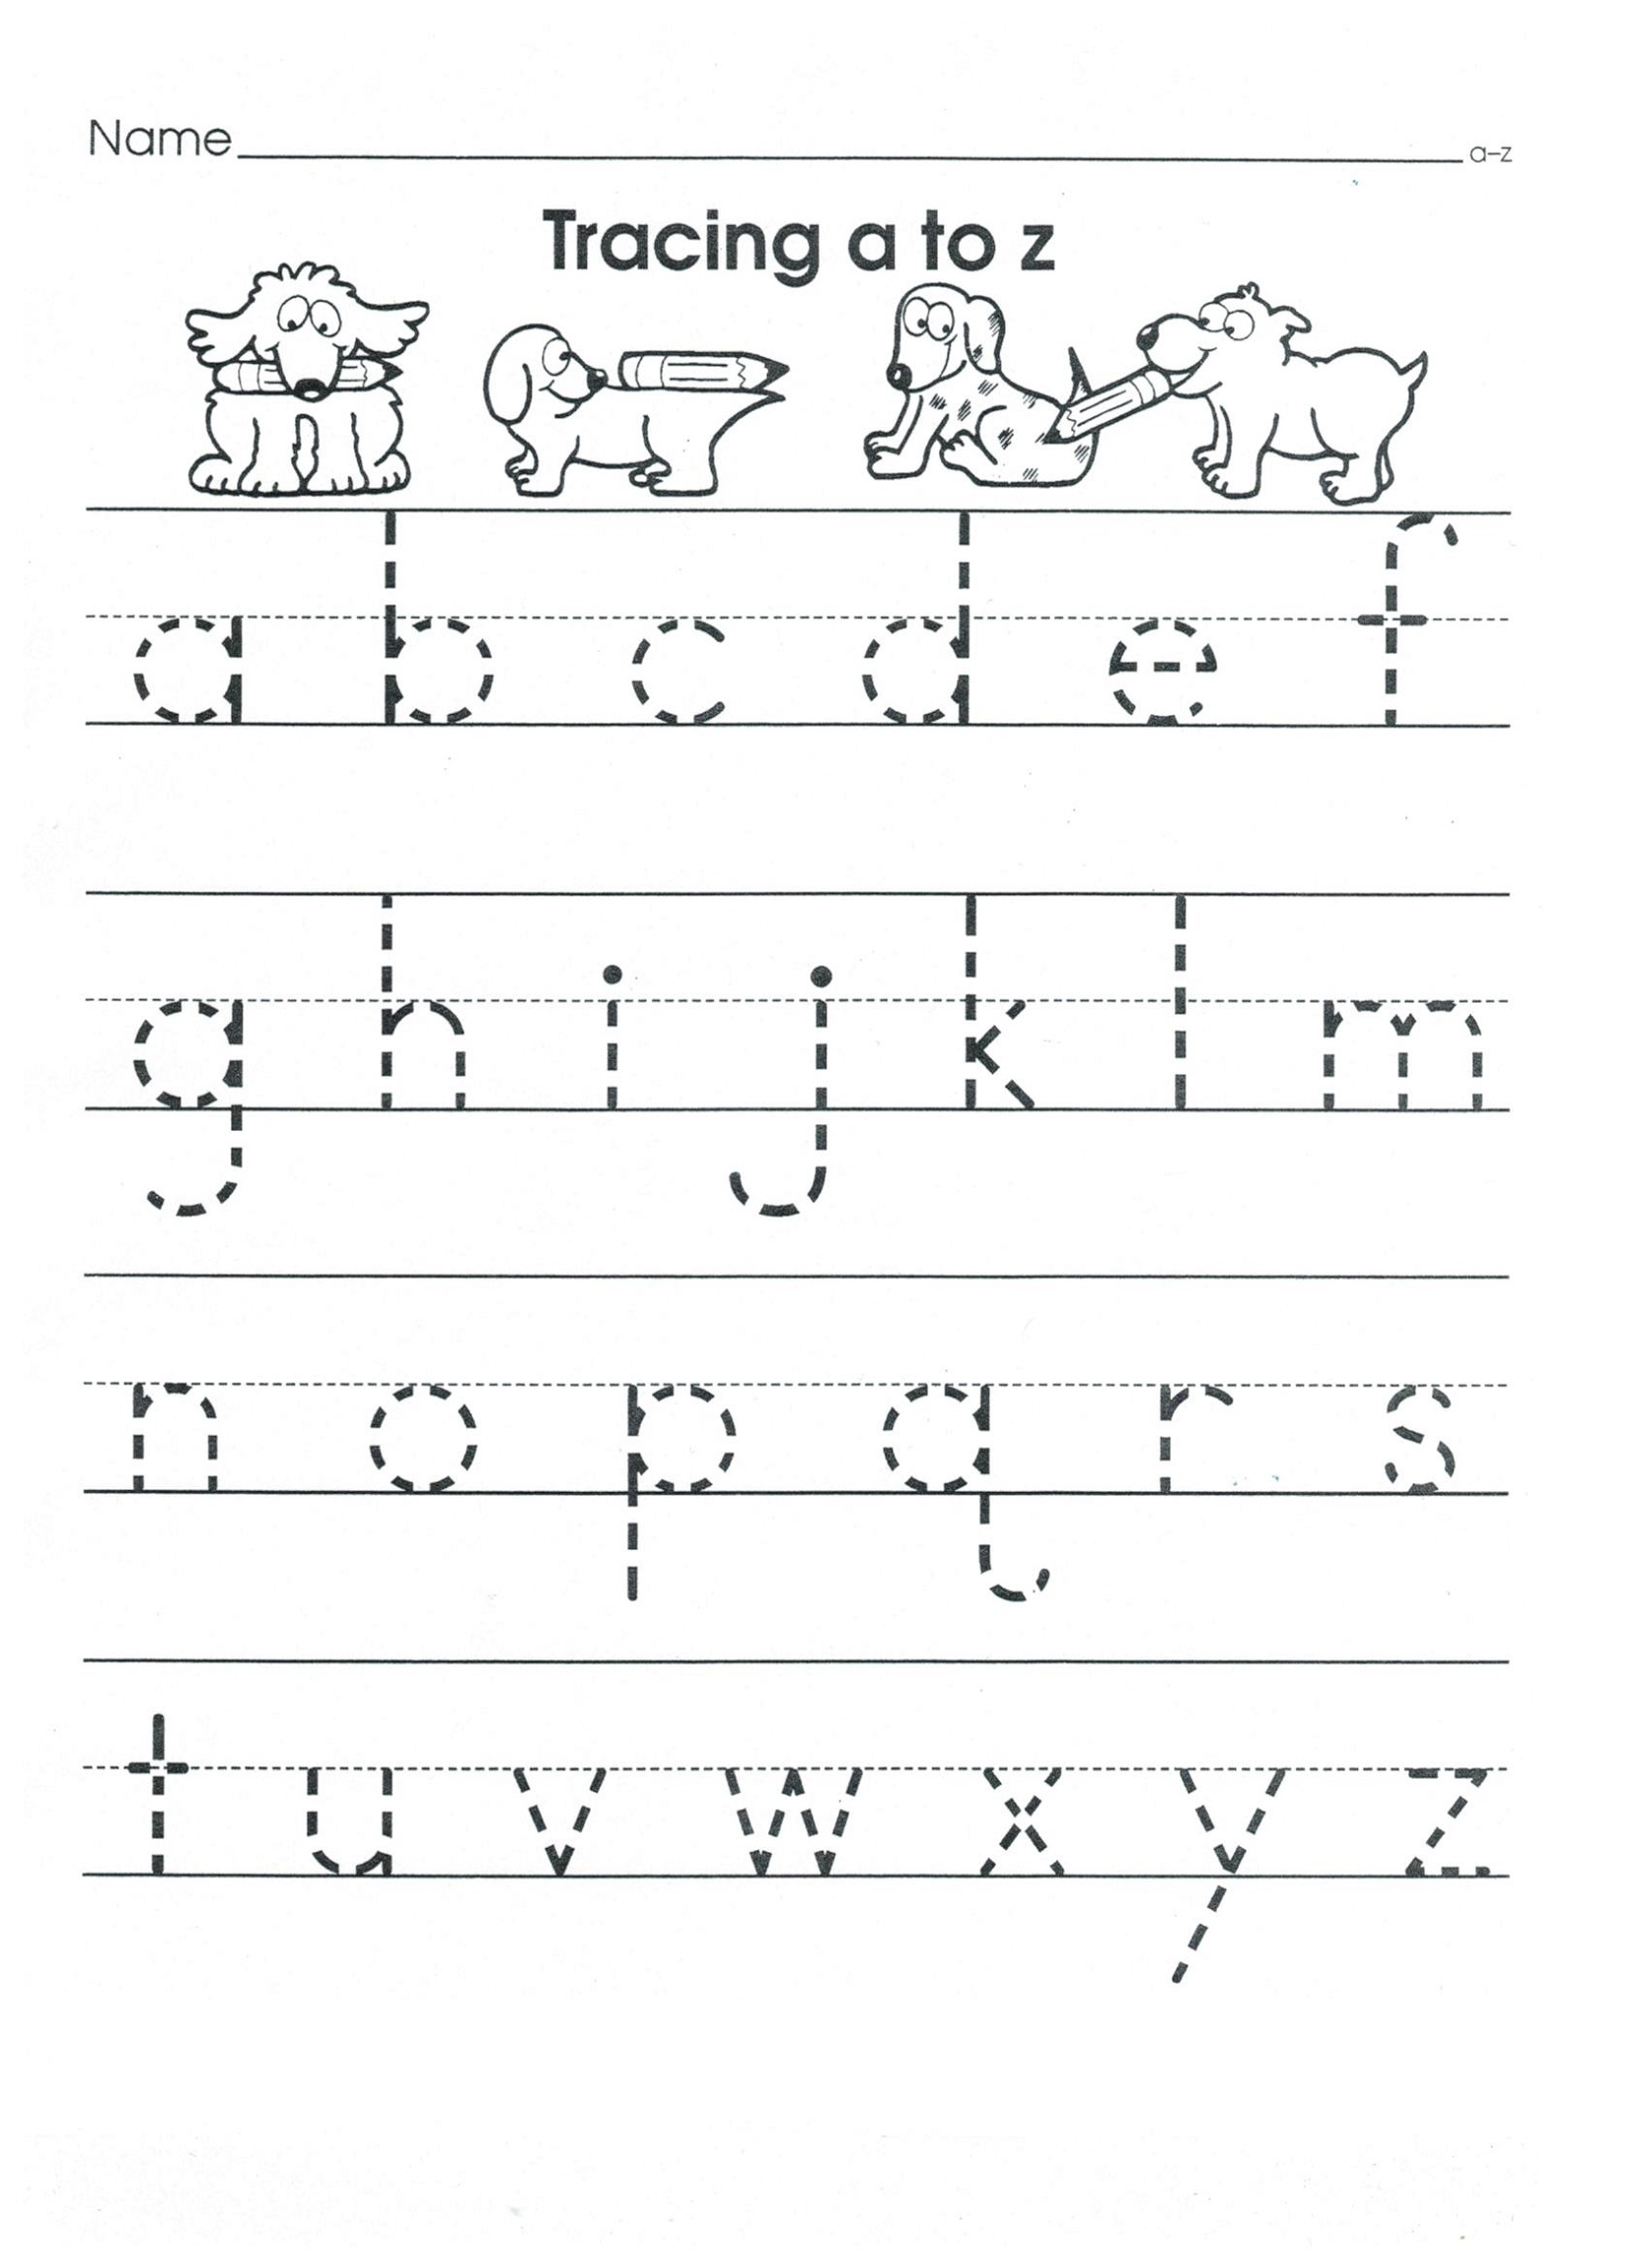 free-printable-lowercase-abc-tracing-worksheets-tracing-worksheets